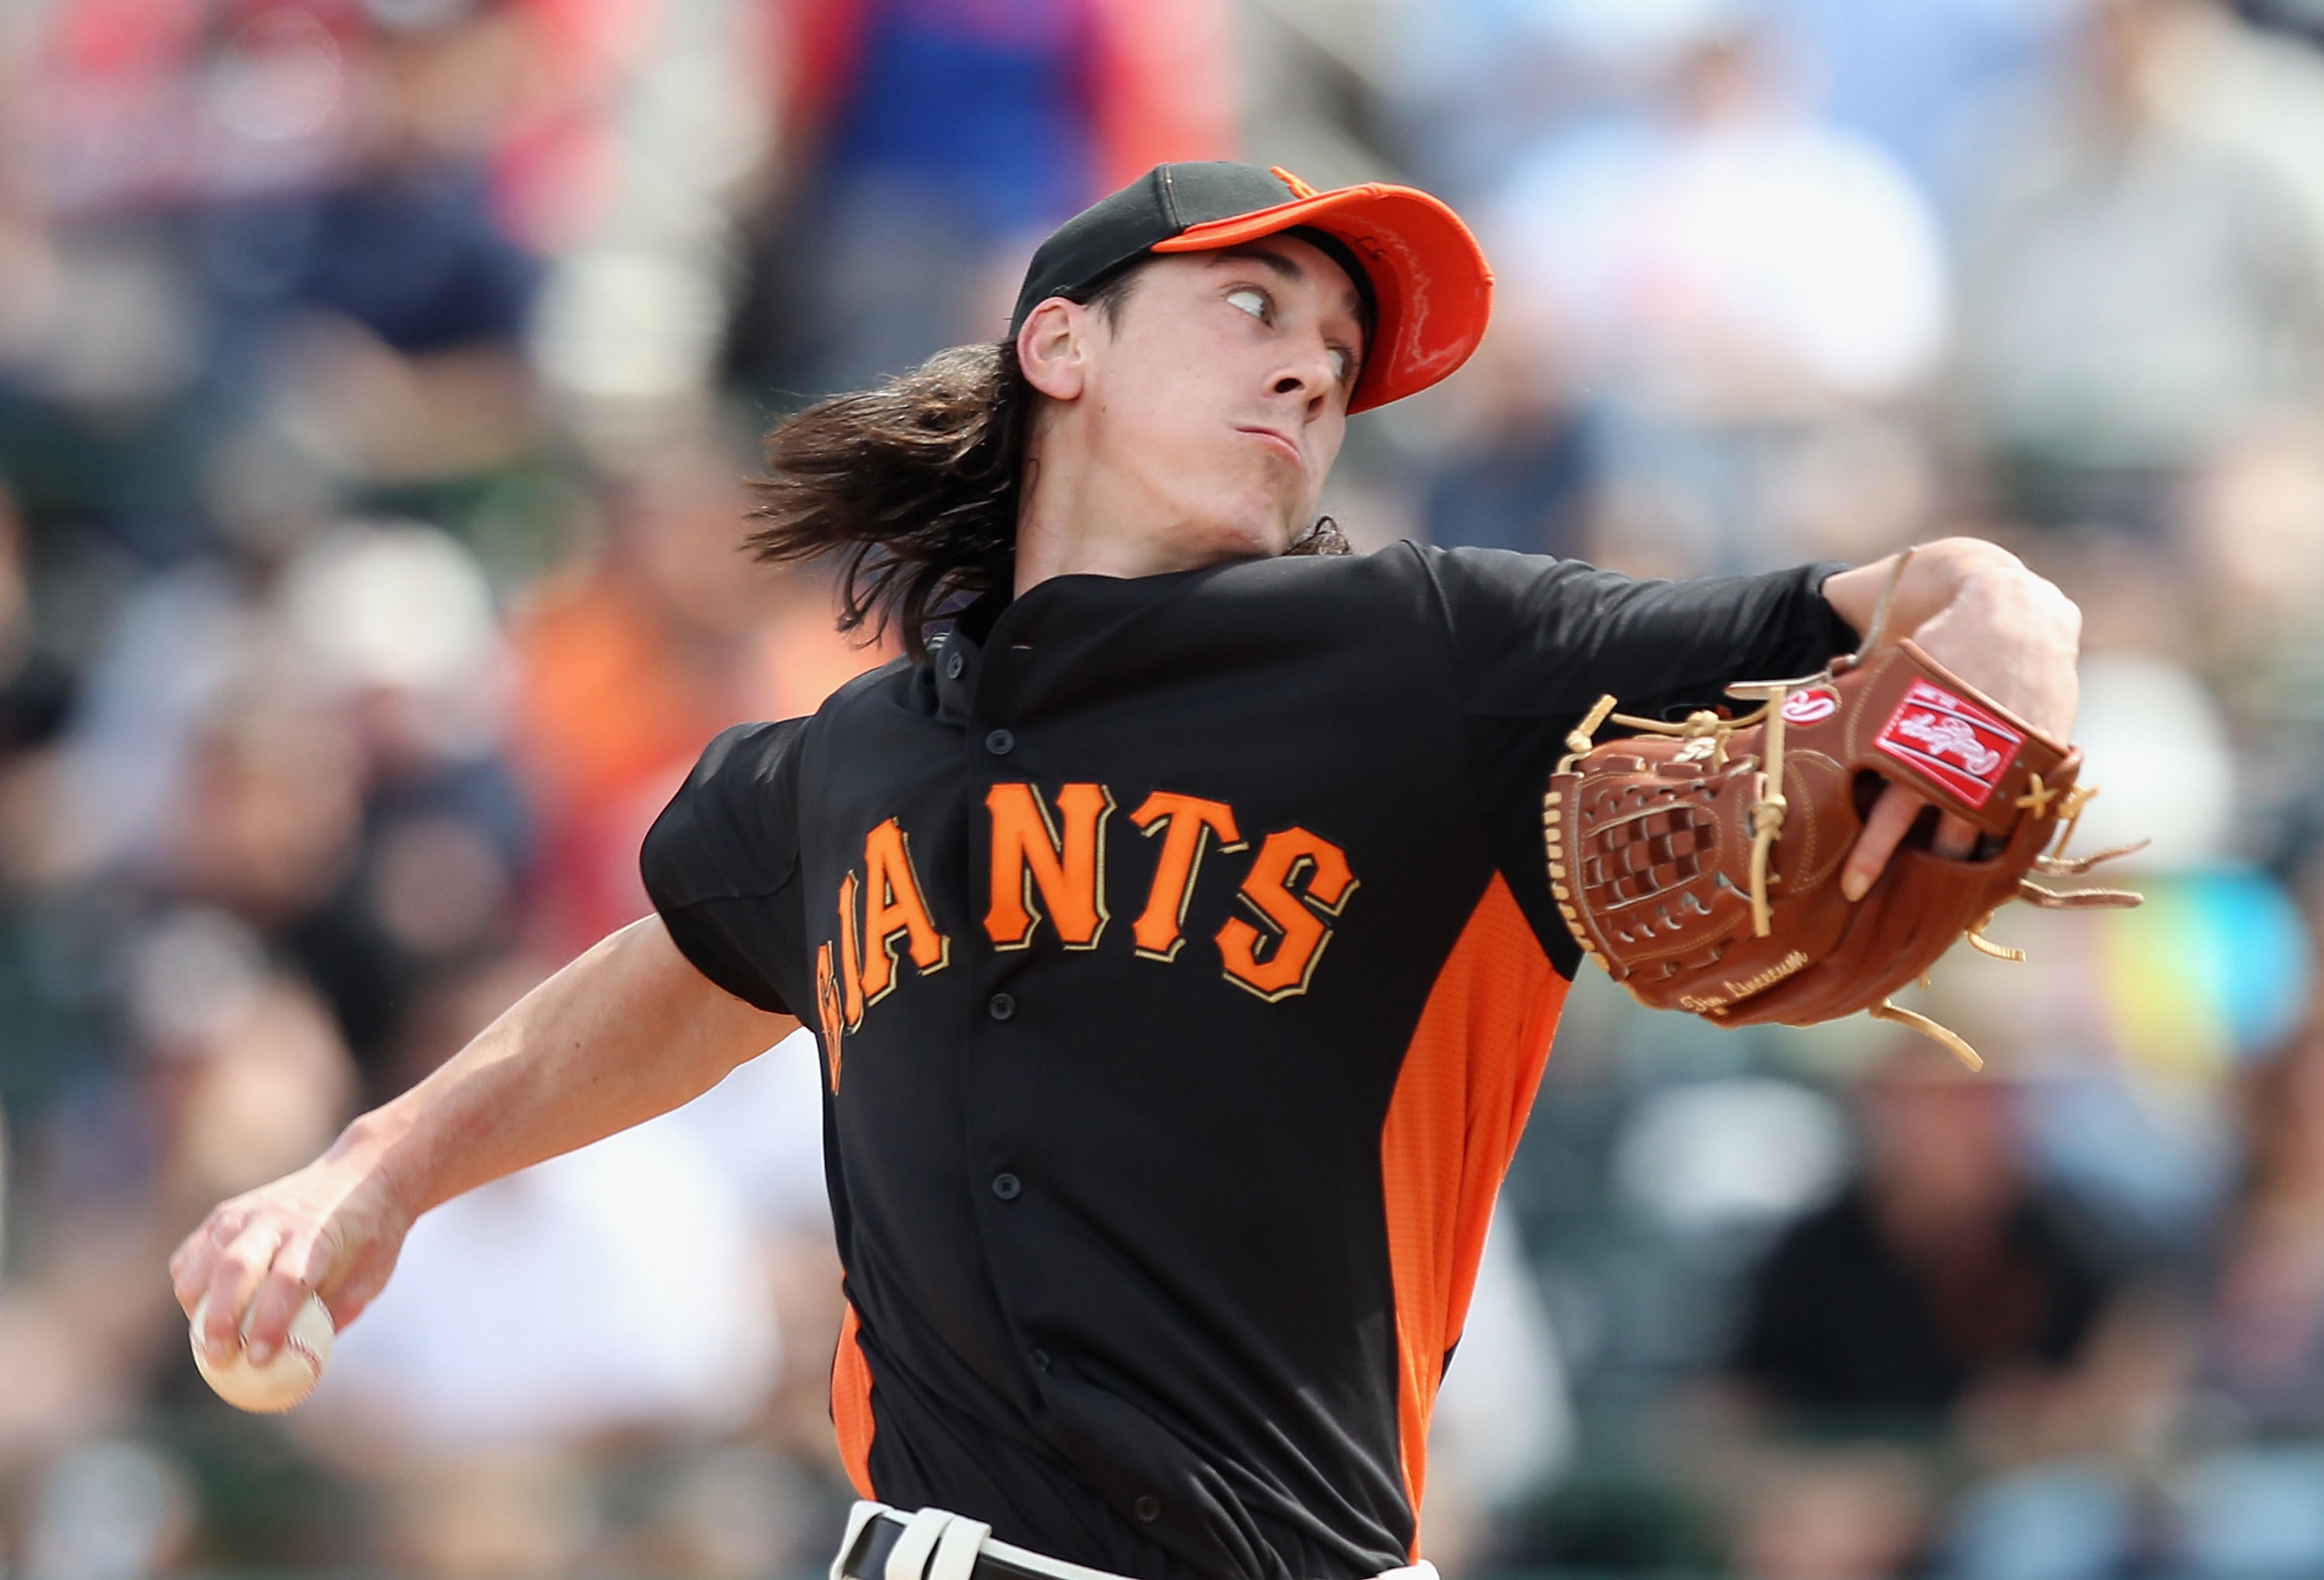 San Francisco Giants starting pitcher Tim Lincecum works against the Los  Angeles Dodgers' in the first inning of a baseball game on Sunday, Sept.  20, 2009, in Los Angeles, Calif. (AP Photo/Keith